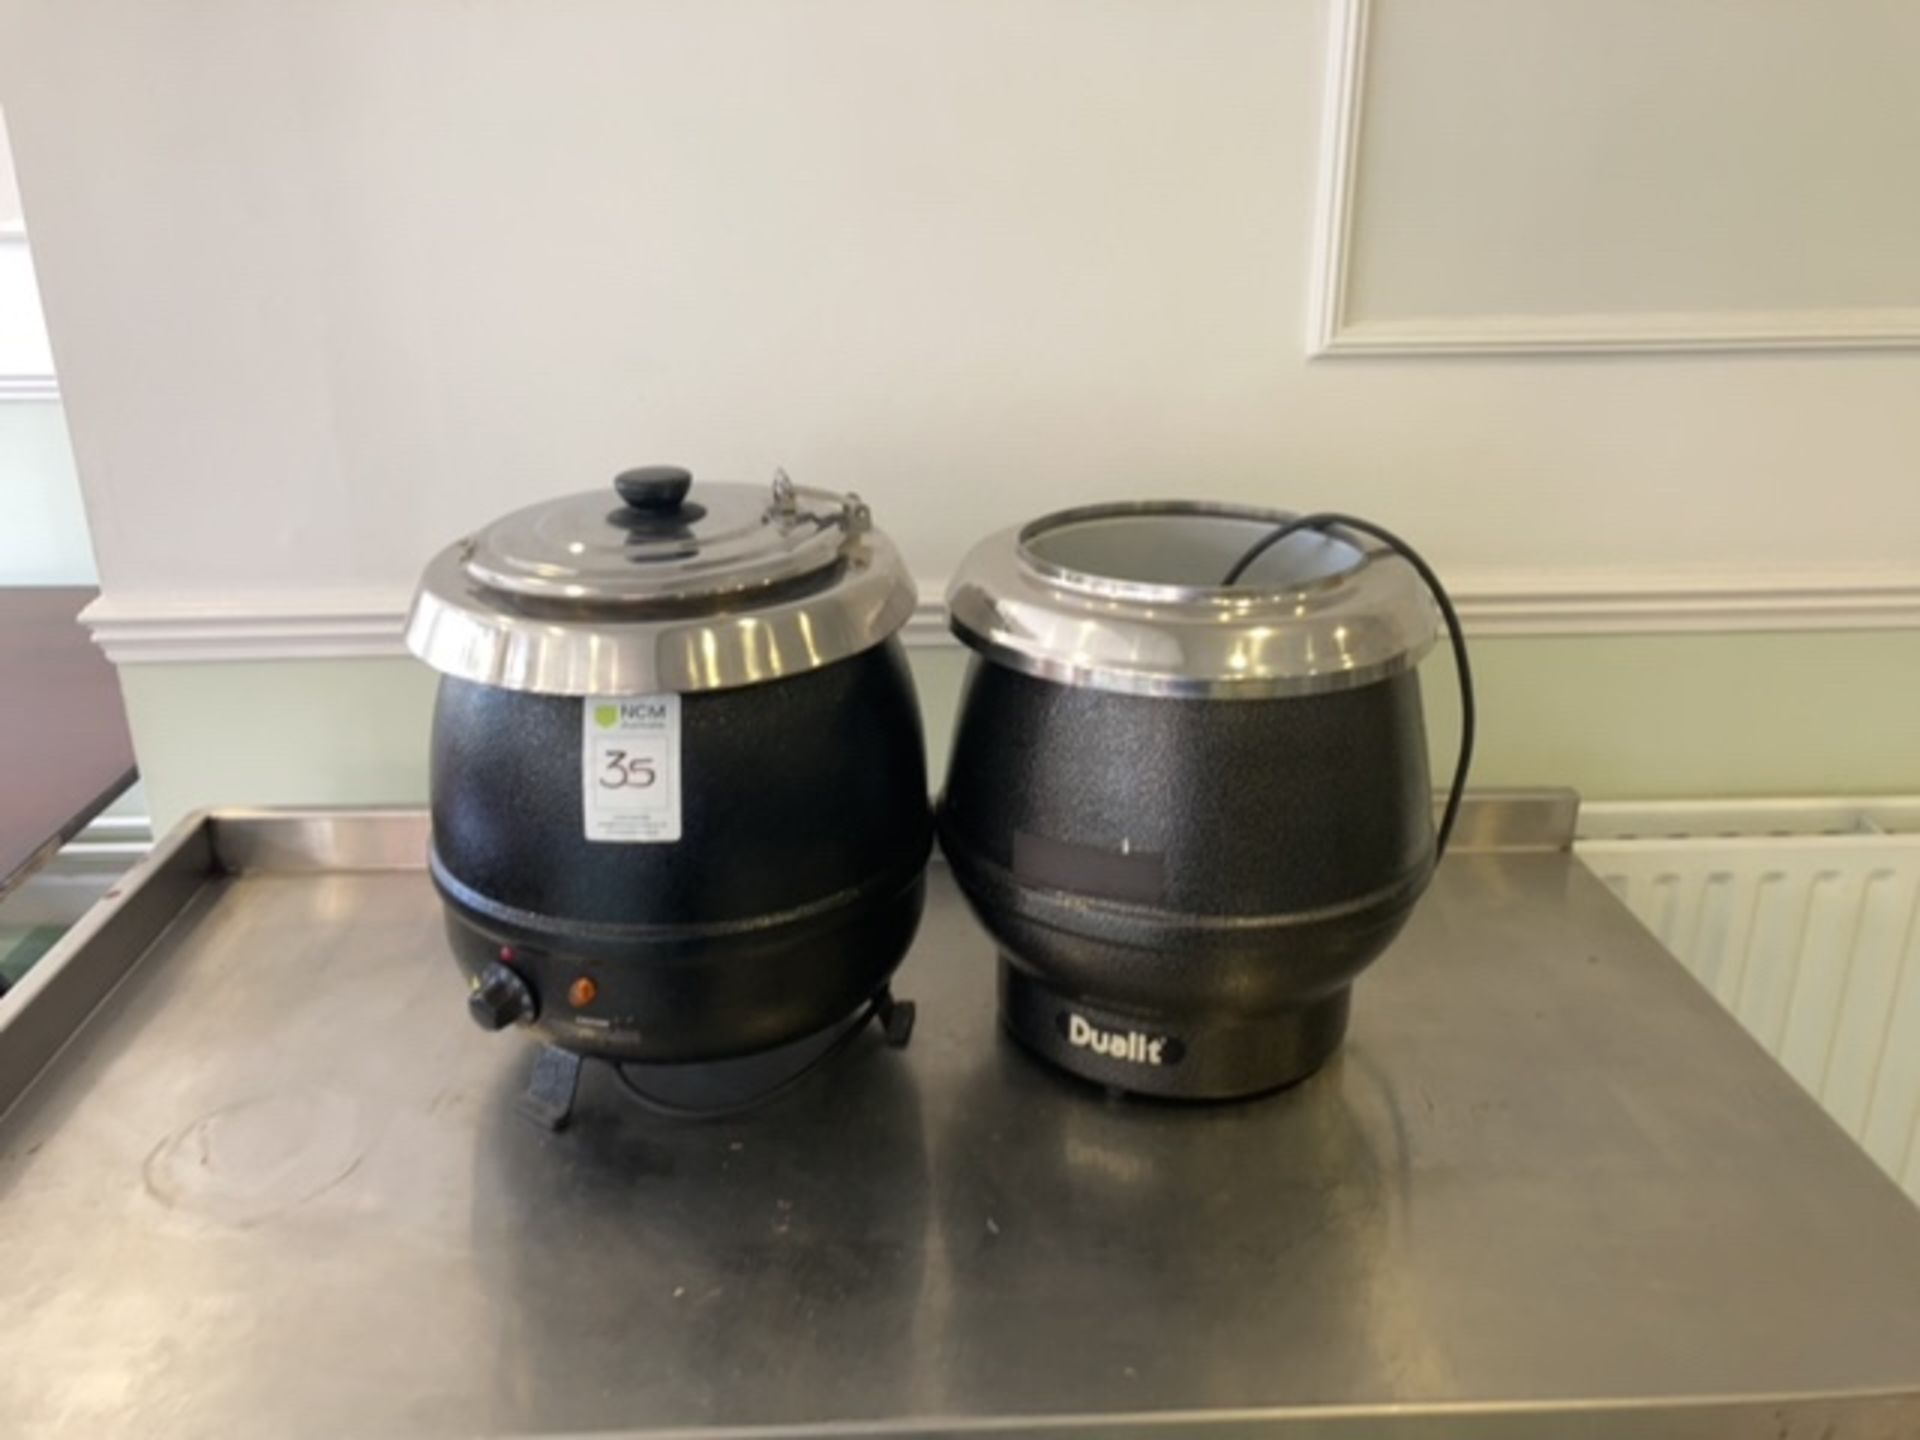 A pair of soup kettles